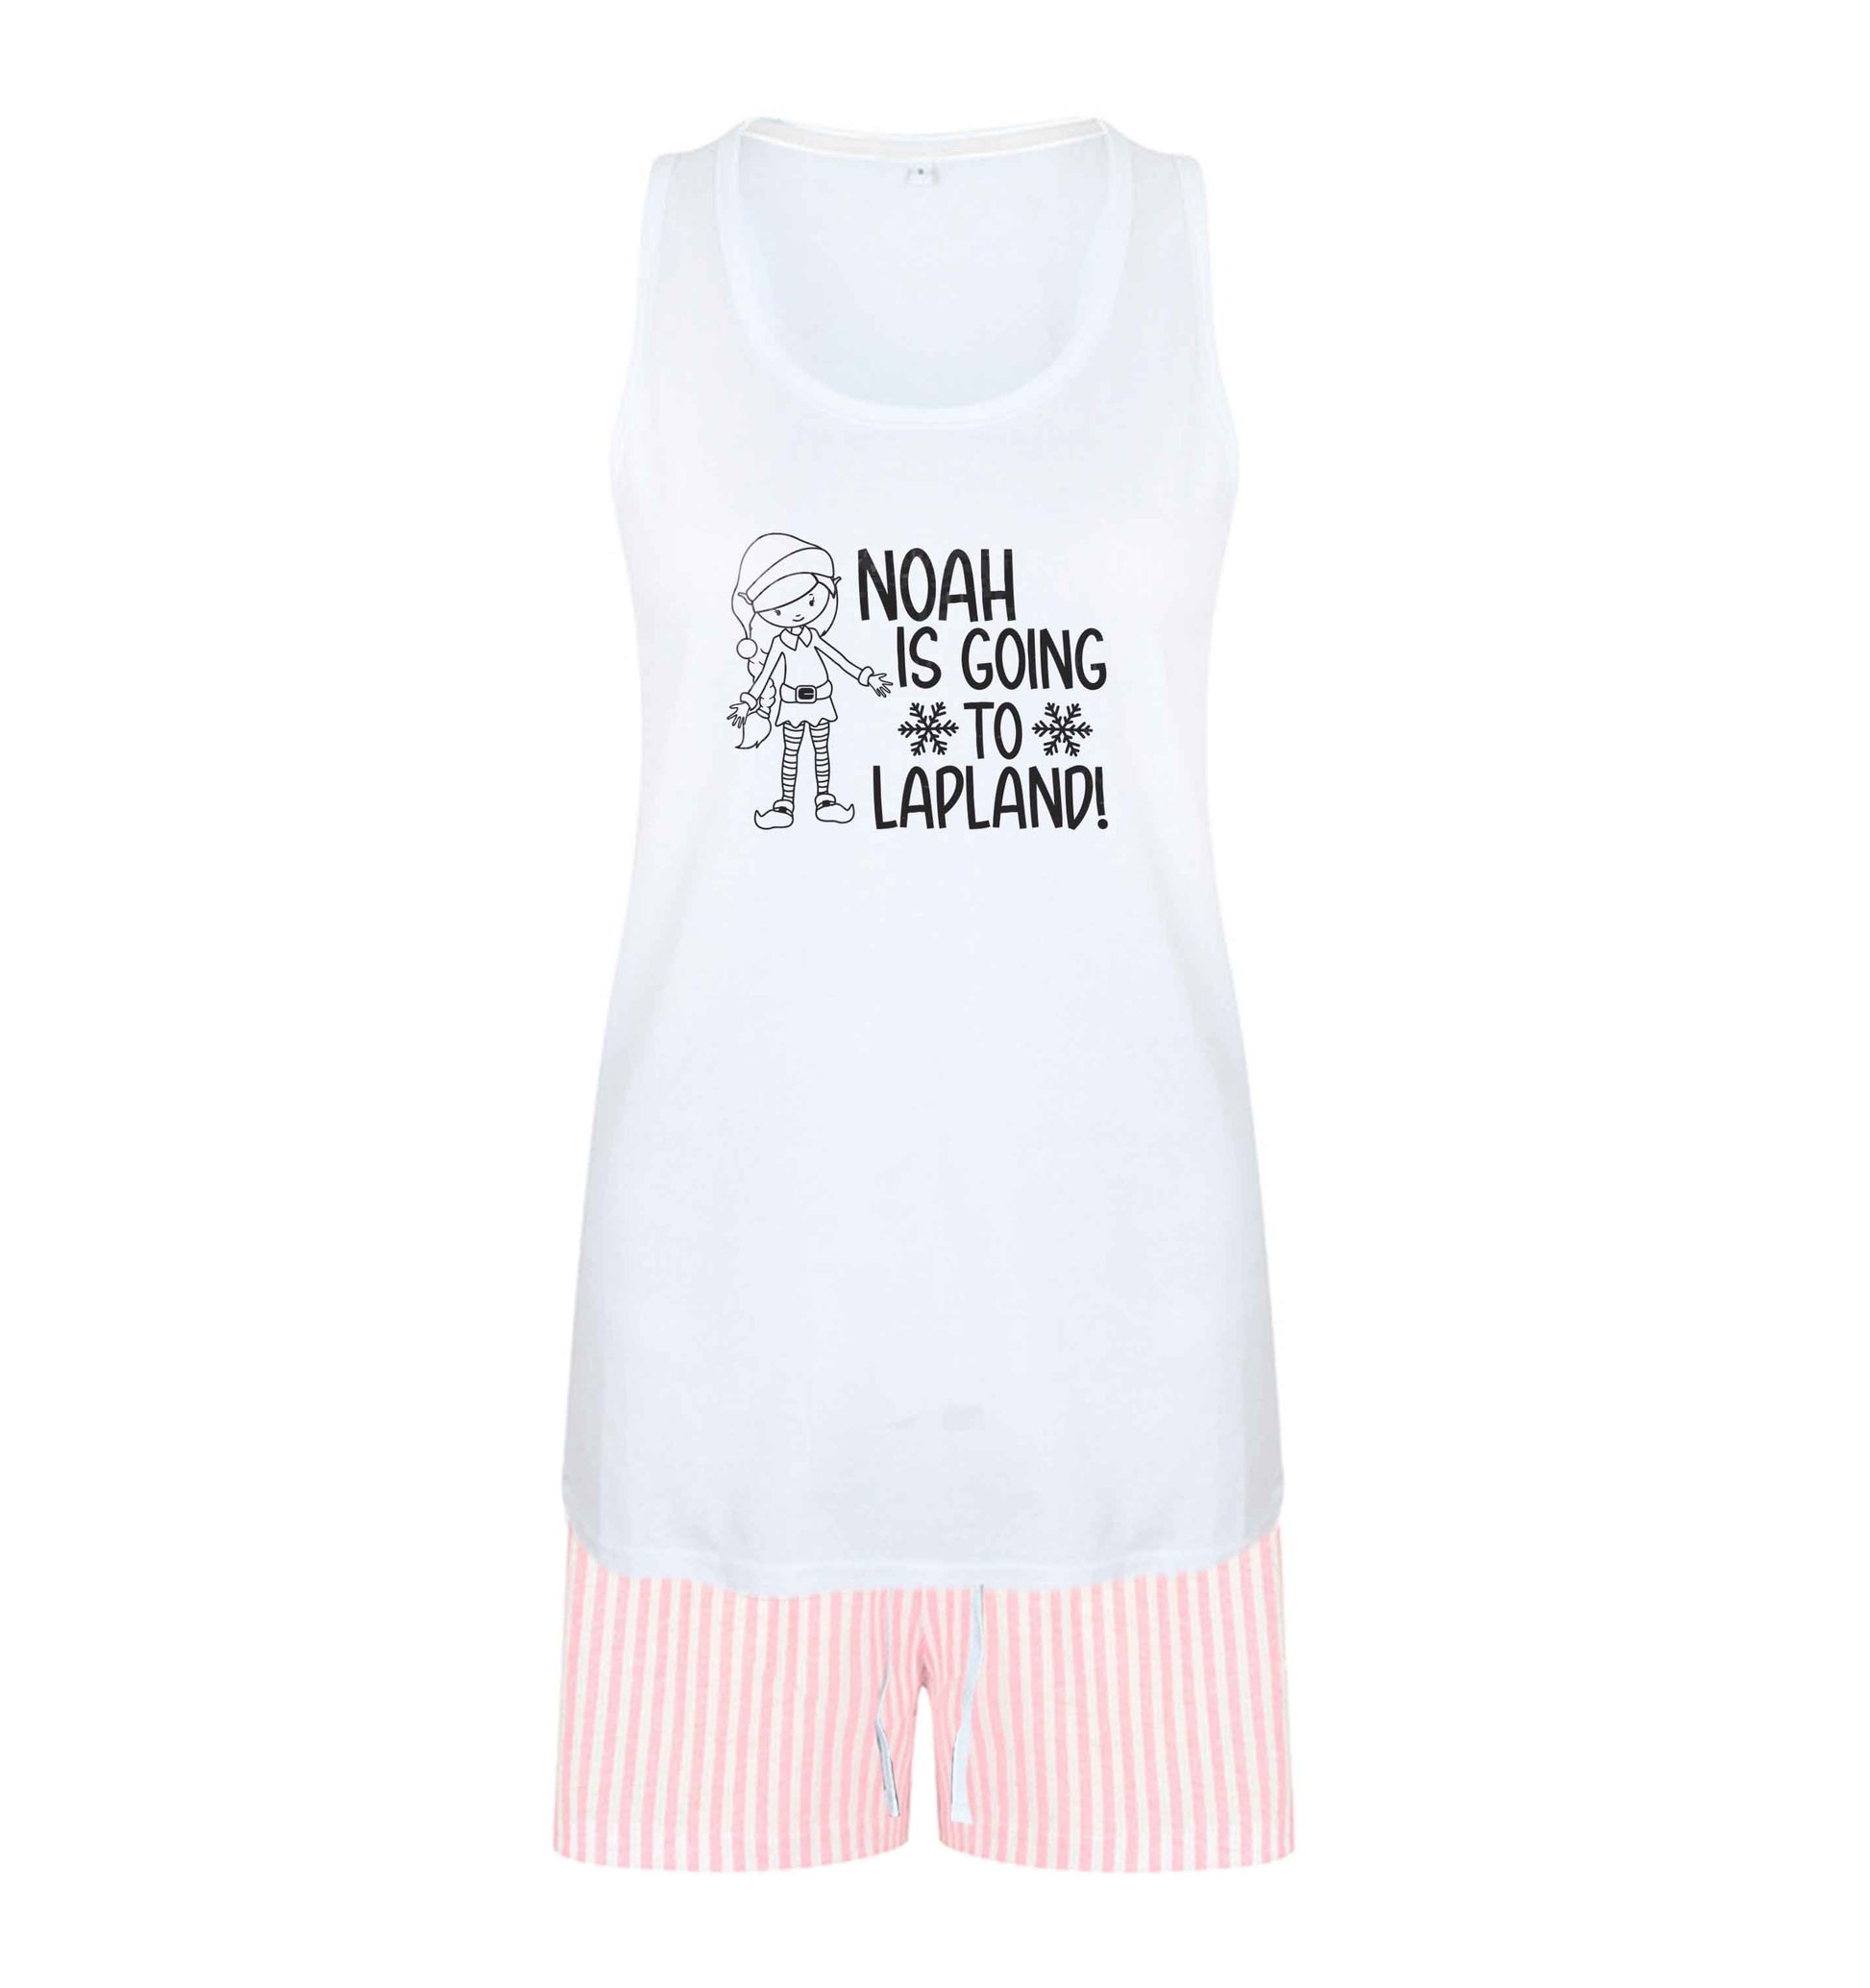 Any name here - is going to Lapland personalised elf size XL women's pyjama shorts set in pink 